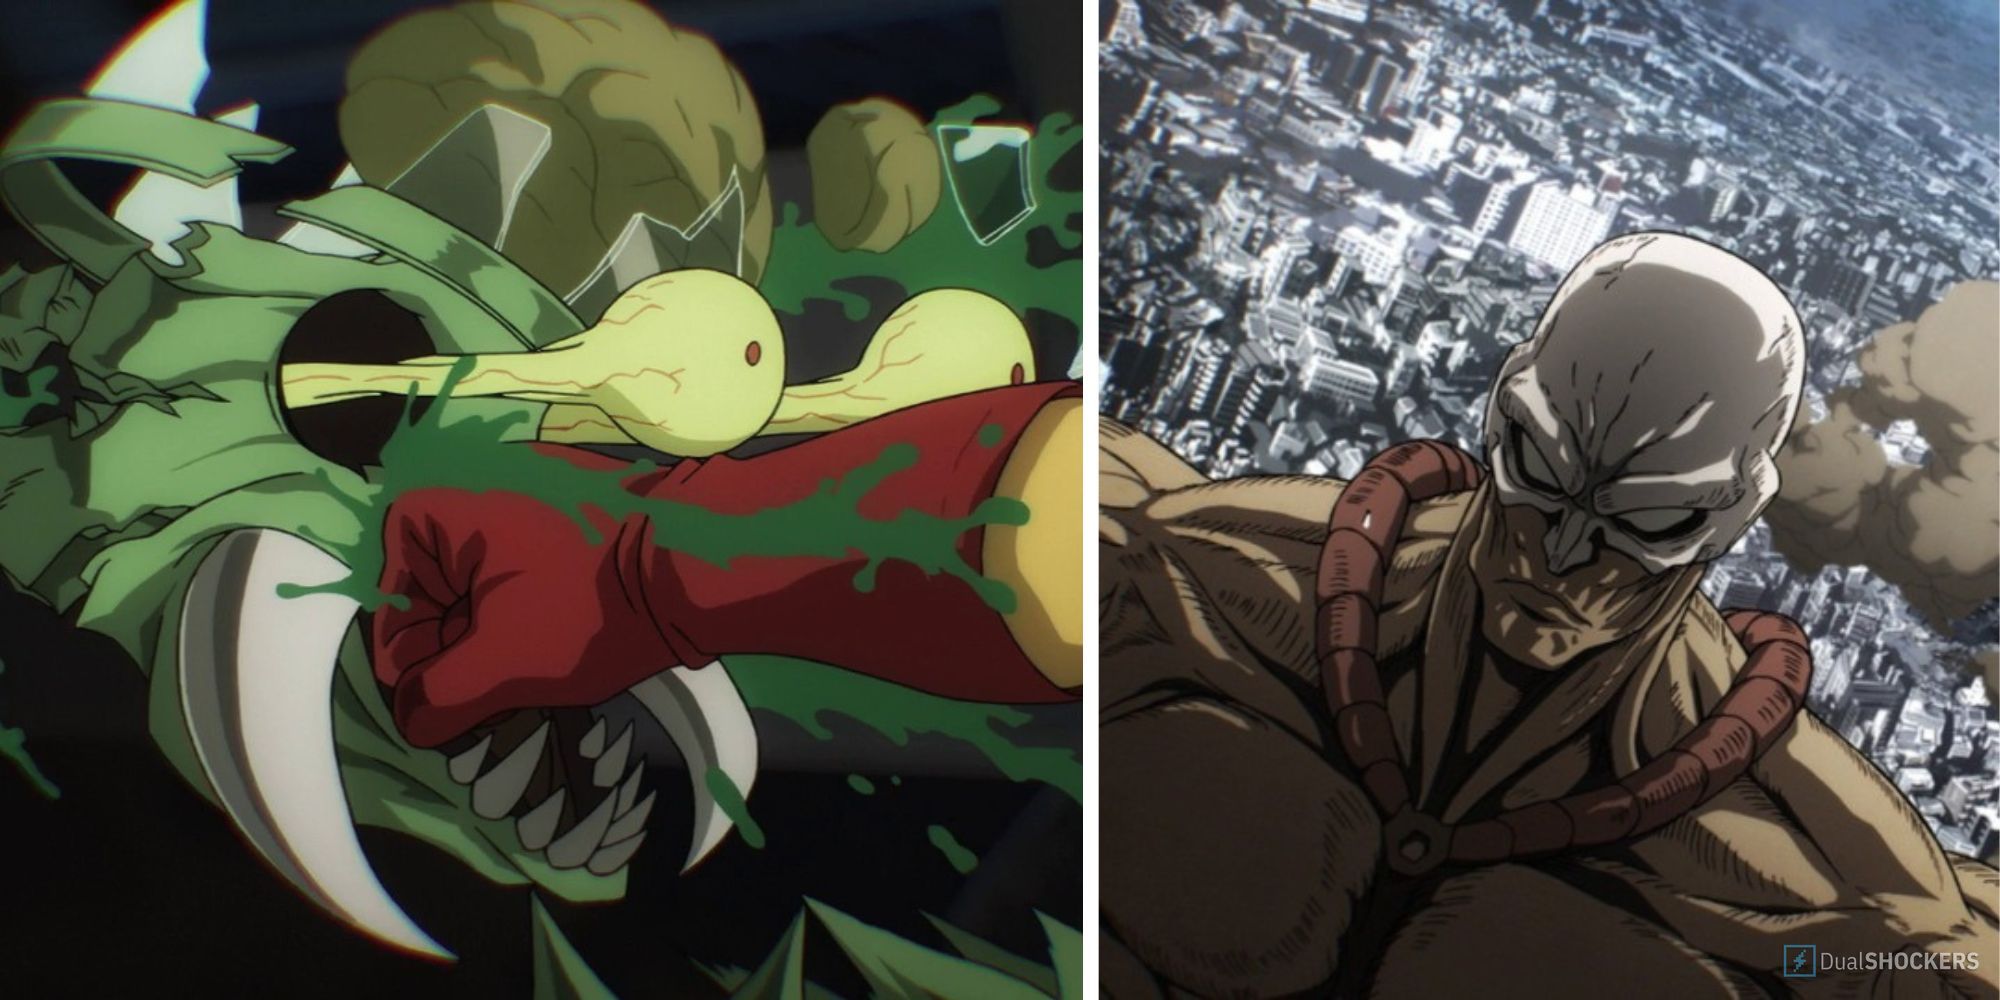 Split image of Mantis Monster Punch and Giant from One Punch Man